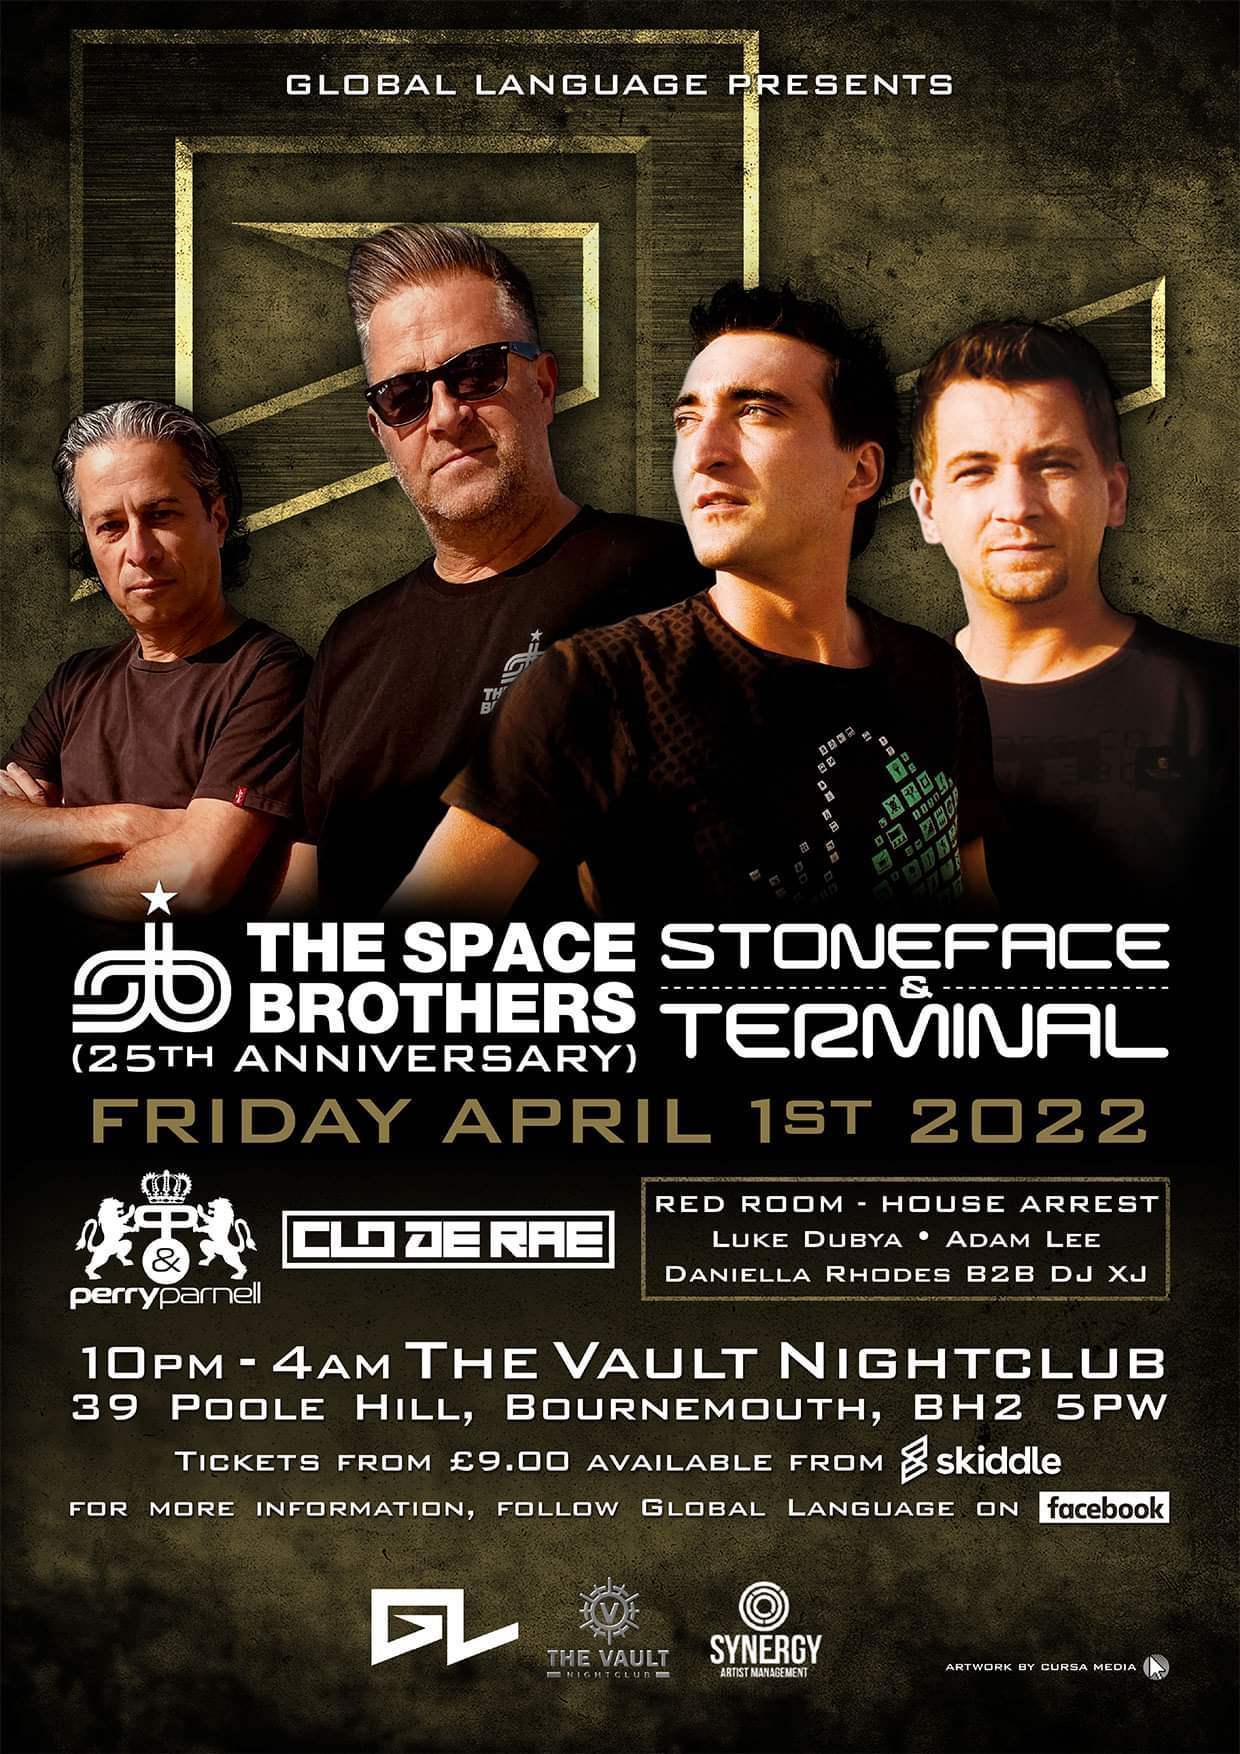 Global Language - The Space Brothers with Stoneface and Terminal - フライヤー表